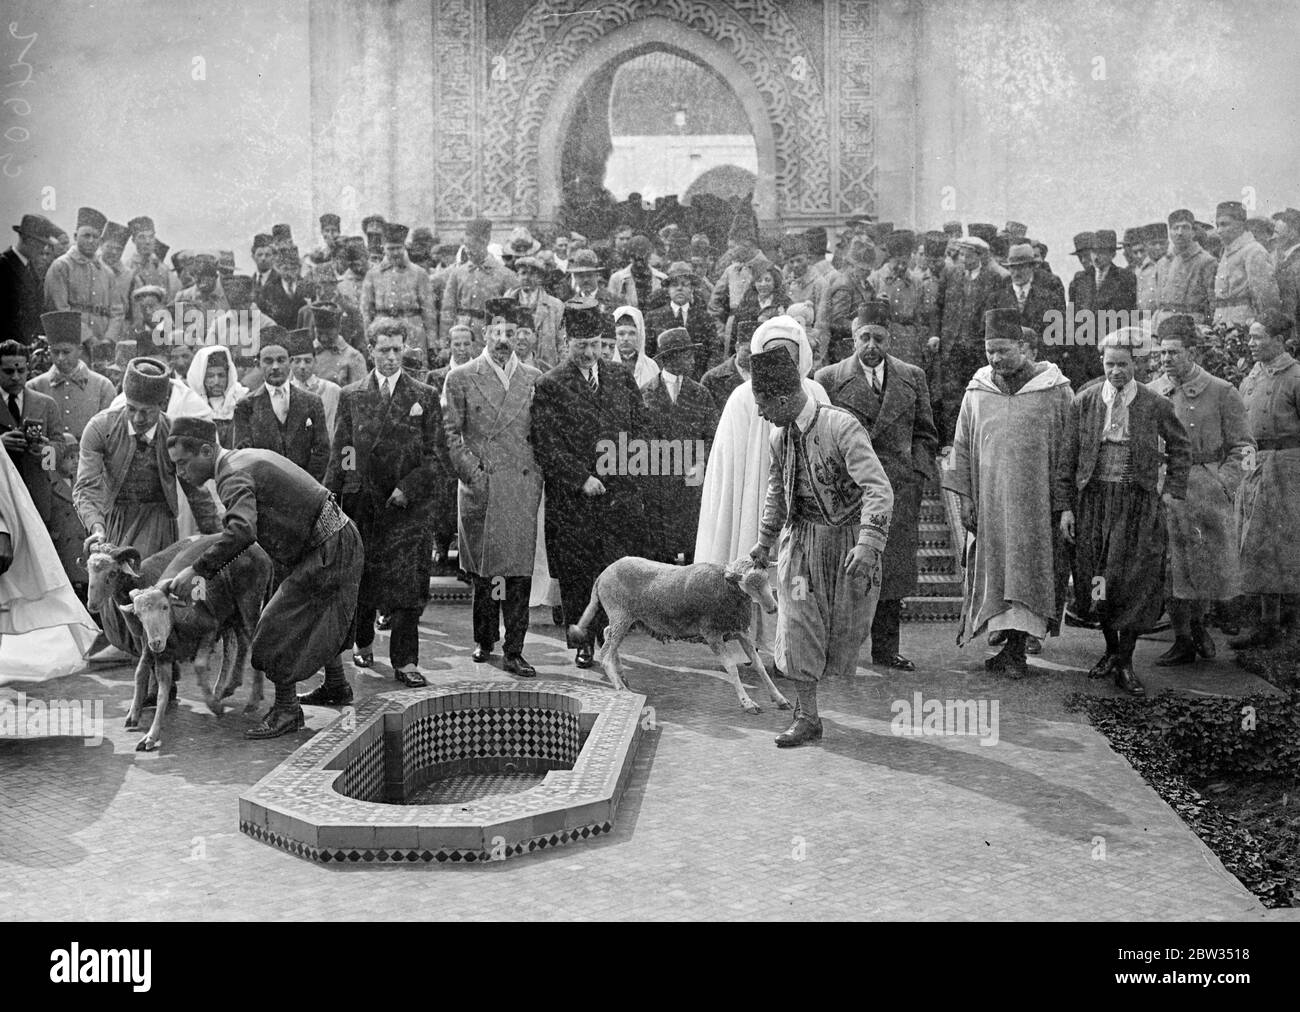 Lambs sacrificed at Muslim festival in Paris . The Muslim festival of Eid Ul Azha , was celebrated at the Paris Mosque , and lambs were offered up for sacrifice . Lambs being presented at the Paris Mosque for sacrifice at the festival . 16 April 1932 . Stock Photo